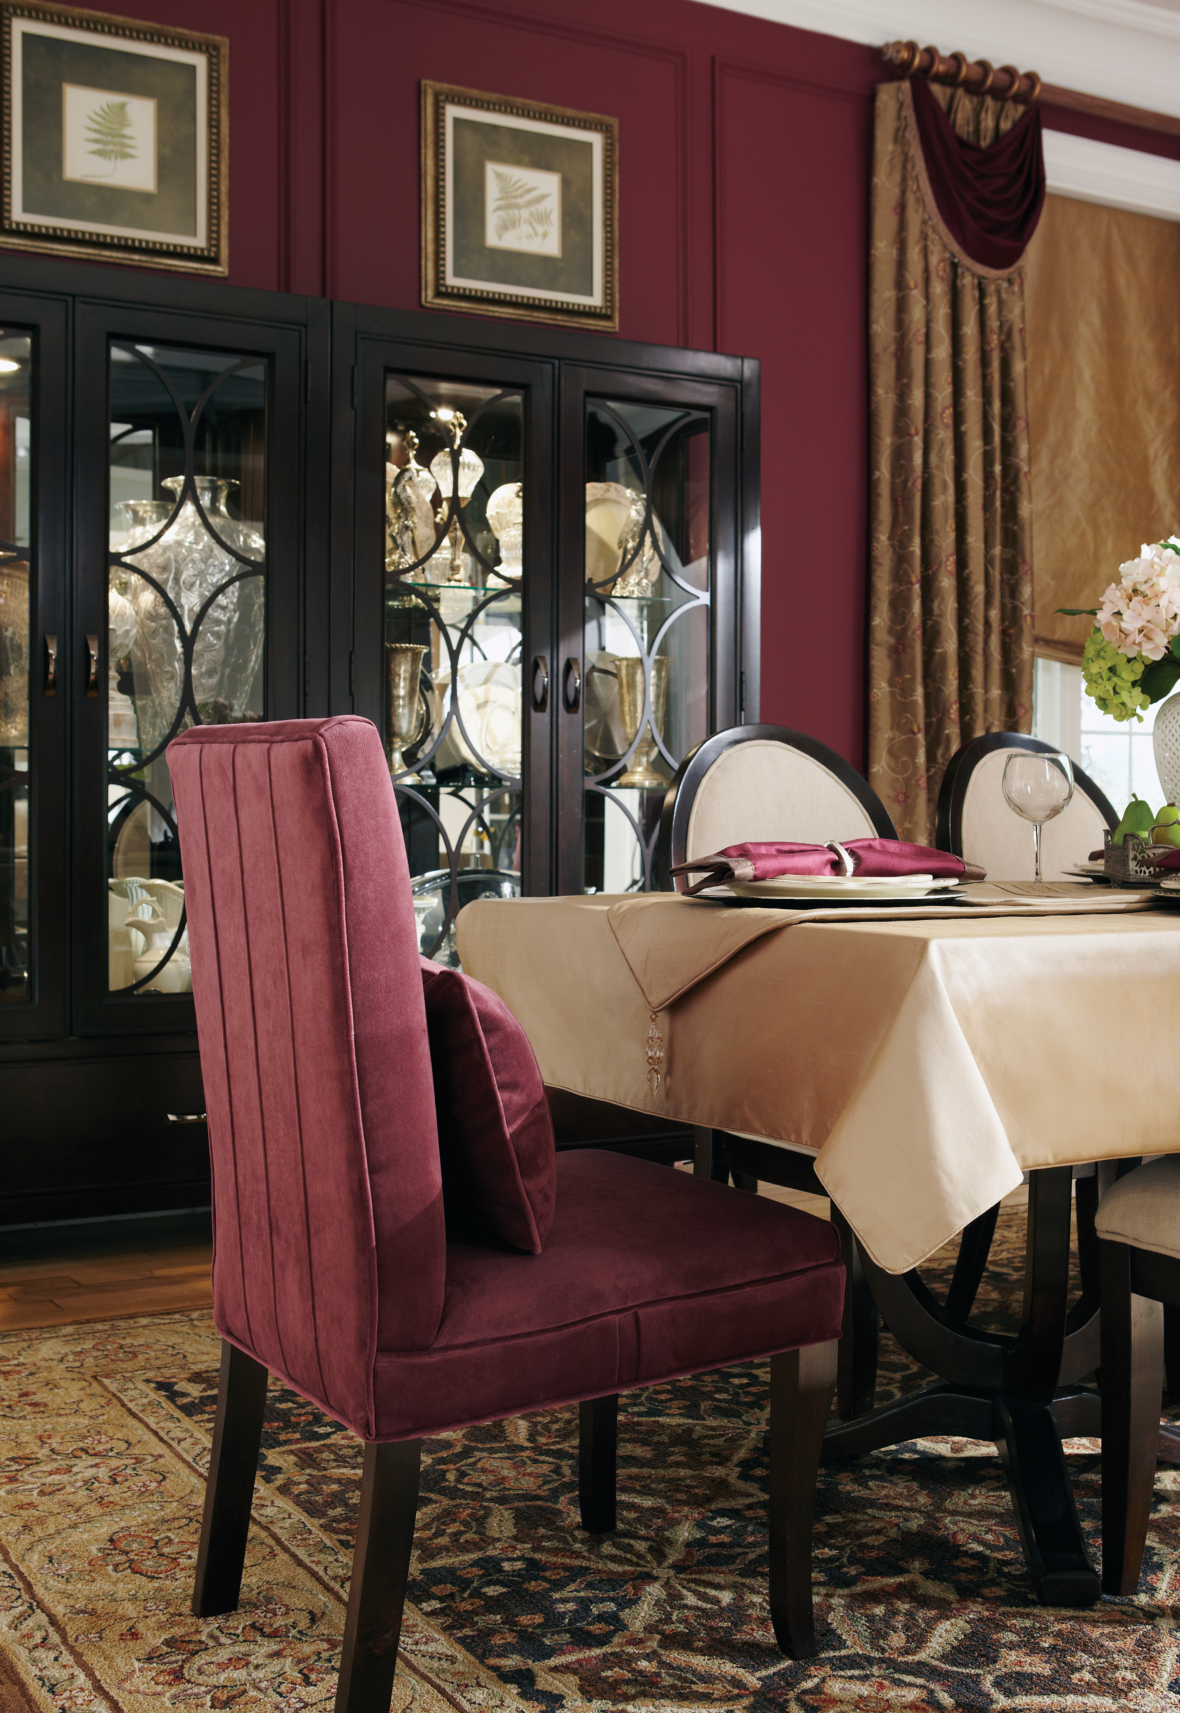 Formal Dining Room - Parson's Chair